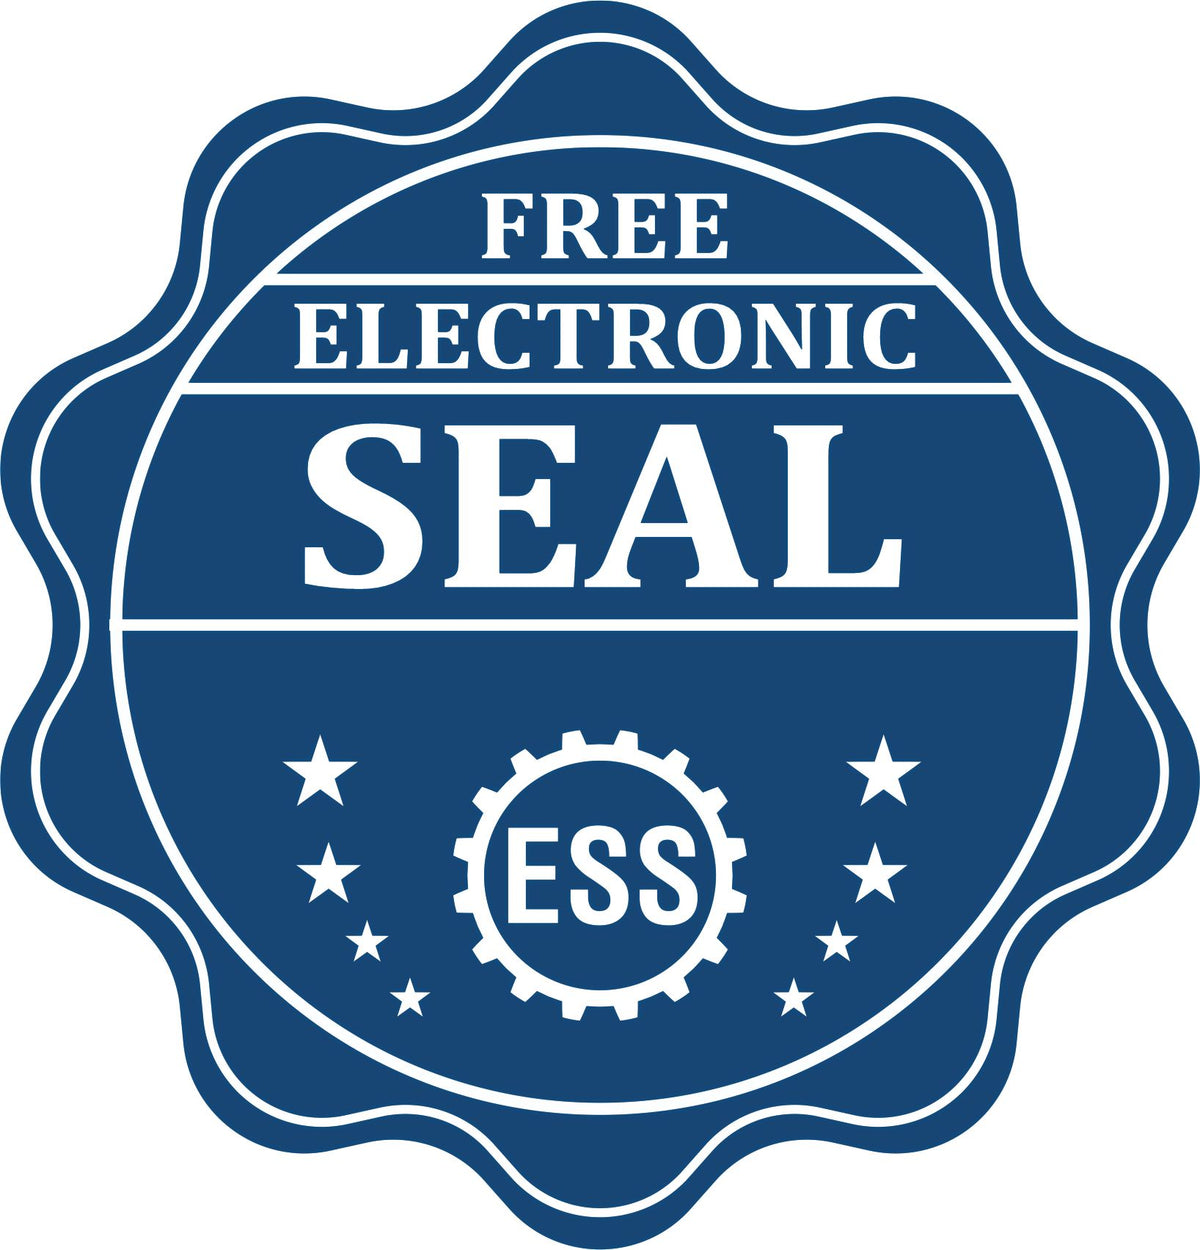 A badge showing a free electronic seal for the Slim Pre-Inked North Carolina Professional Geologist Seal Stamp with stars and the ESS gear on the emblem.